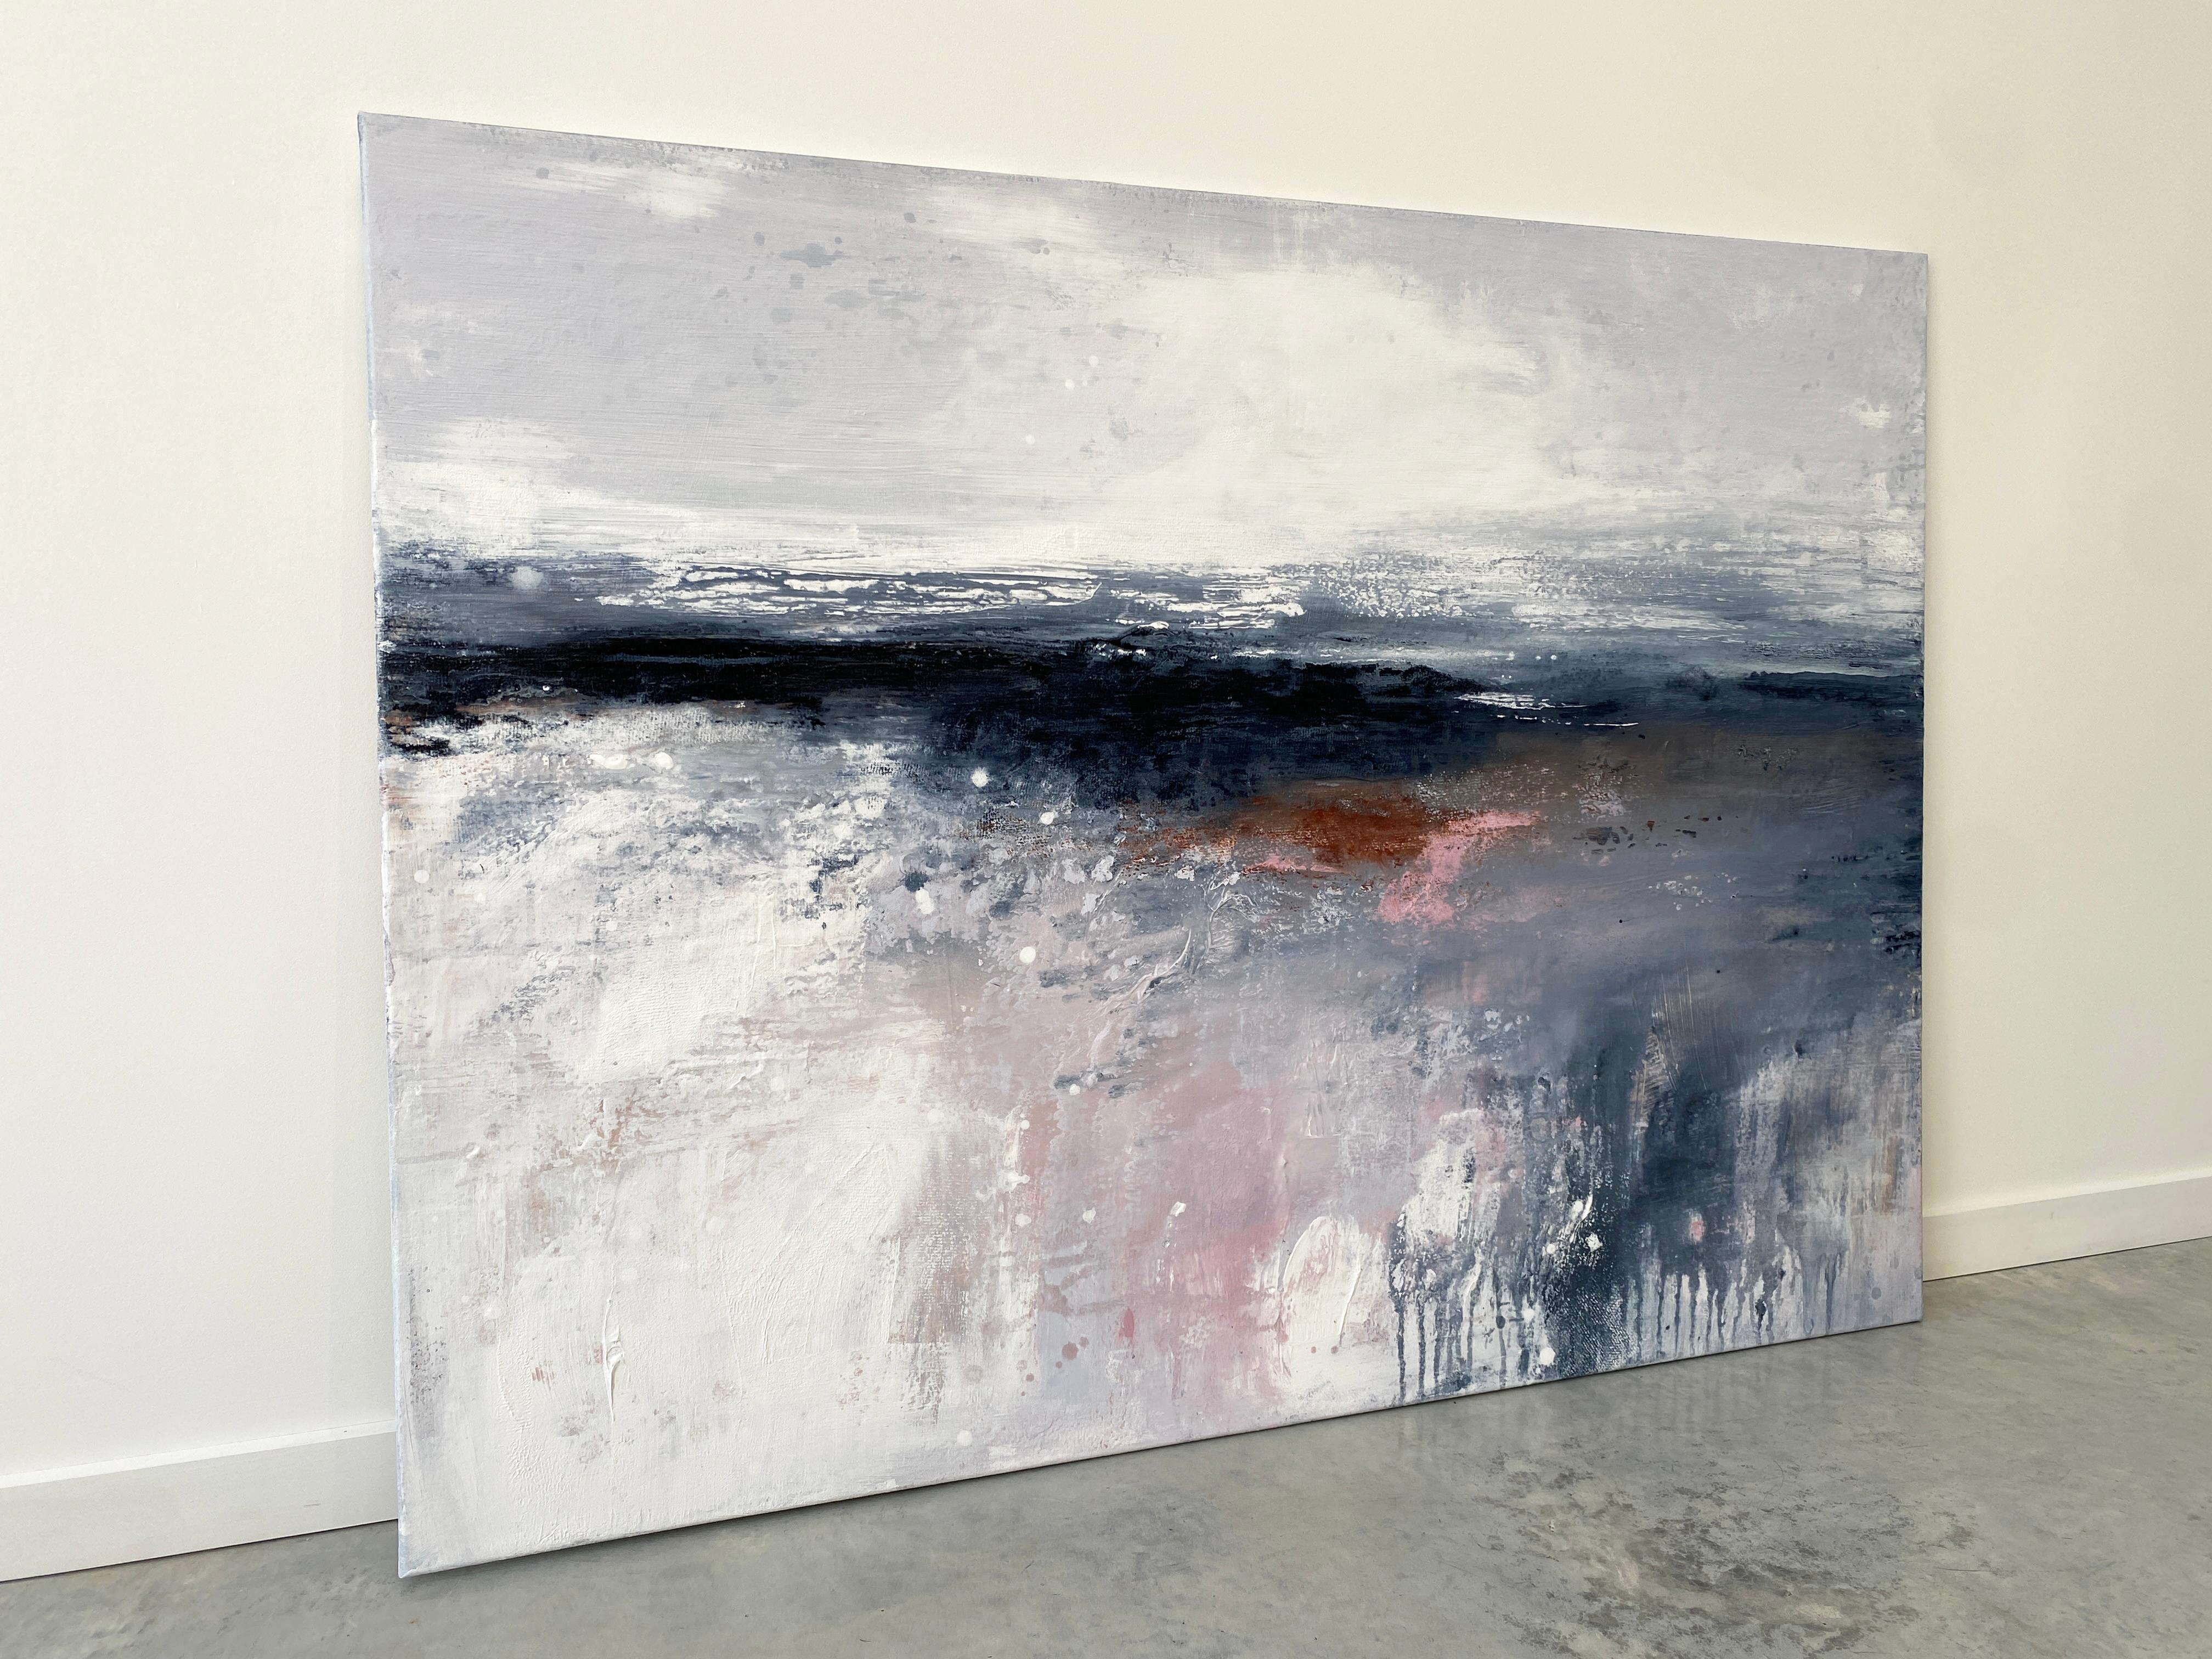 After the Storm an abstract landscape painting from my 'Serene Shorelines Collection'. 
Exploring the beauty of Australian coastal shorelines with mirrored waters, sandy stretches and rocky outcrops. Feel the peace, quietness and serene light in